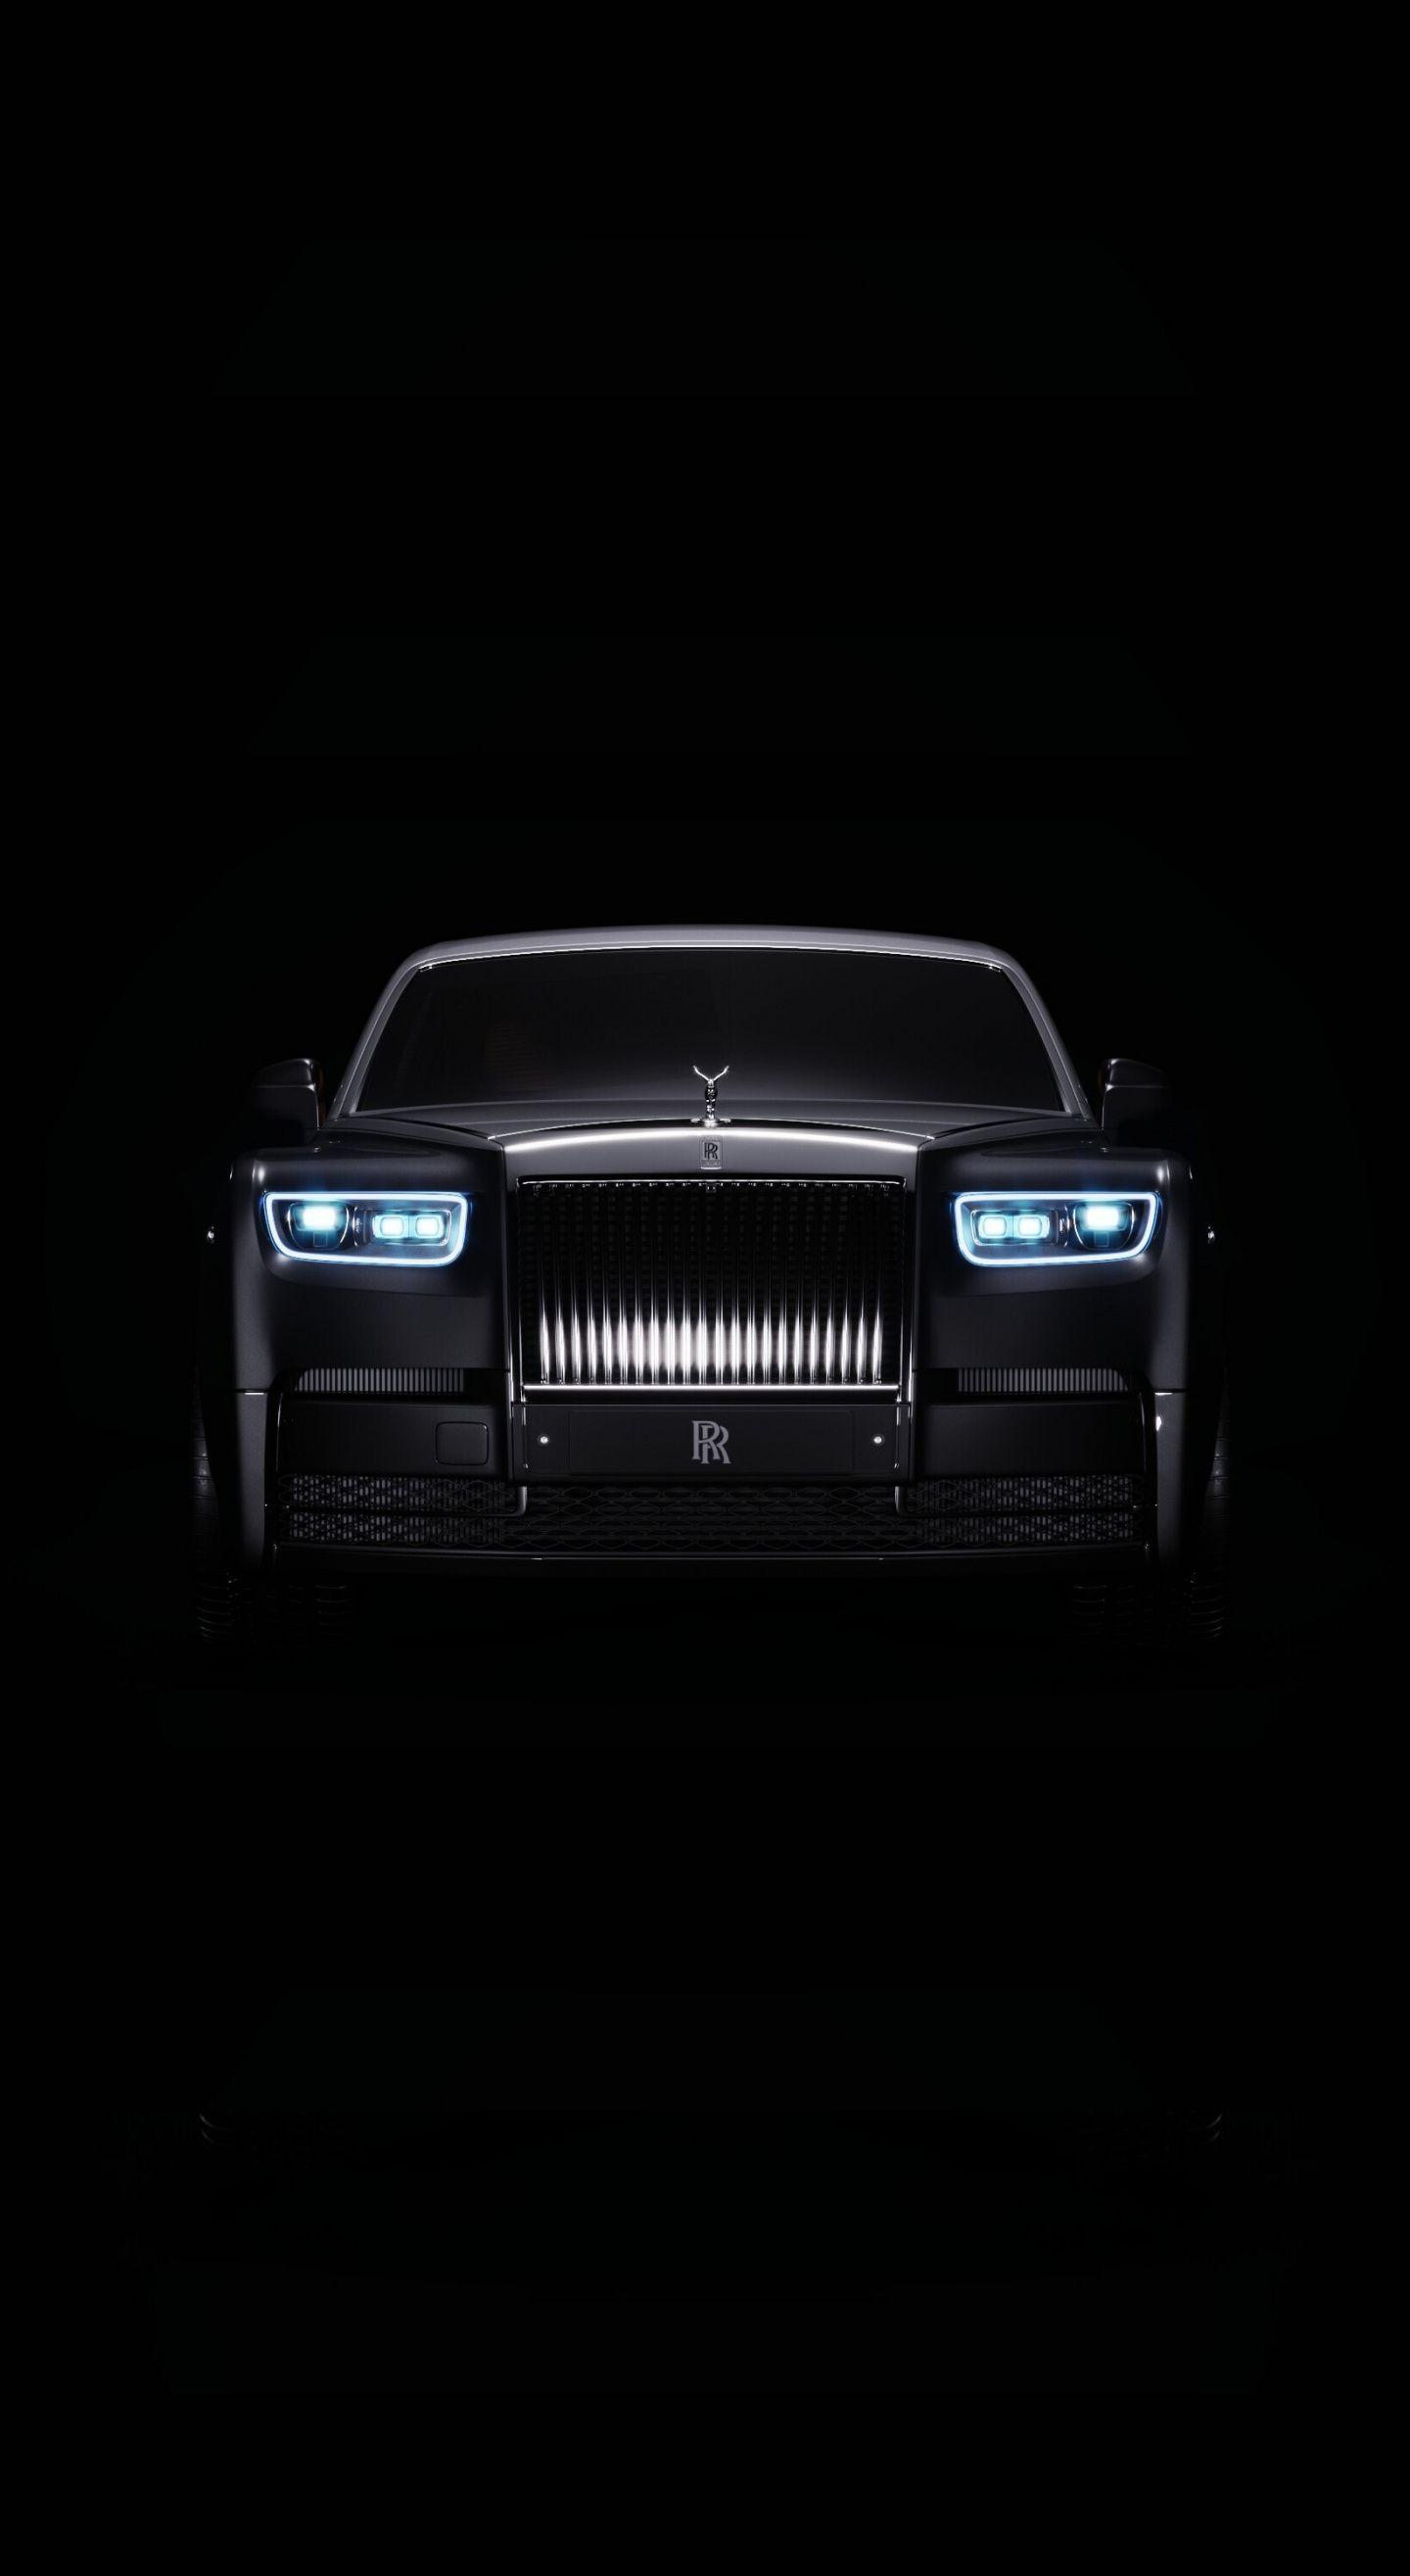 1080x1920  1080x1920 rolls royce wraith rolls royce cars hd behance  dark for Iphone 6 7 8 wallpaper  Coolwallpapersme